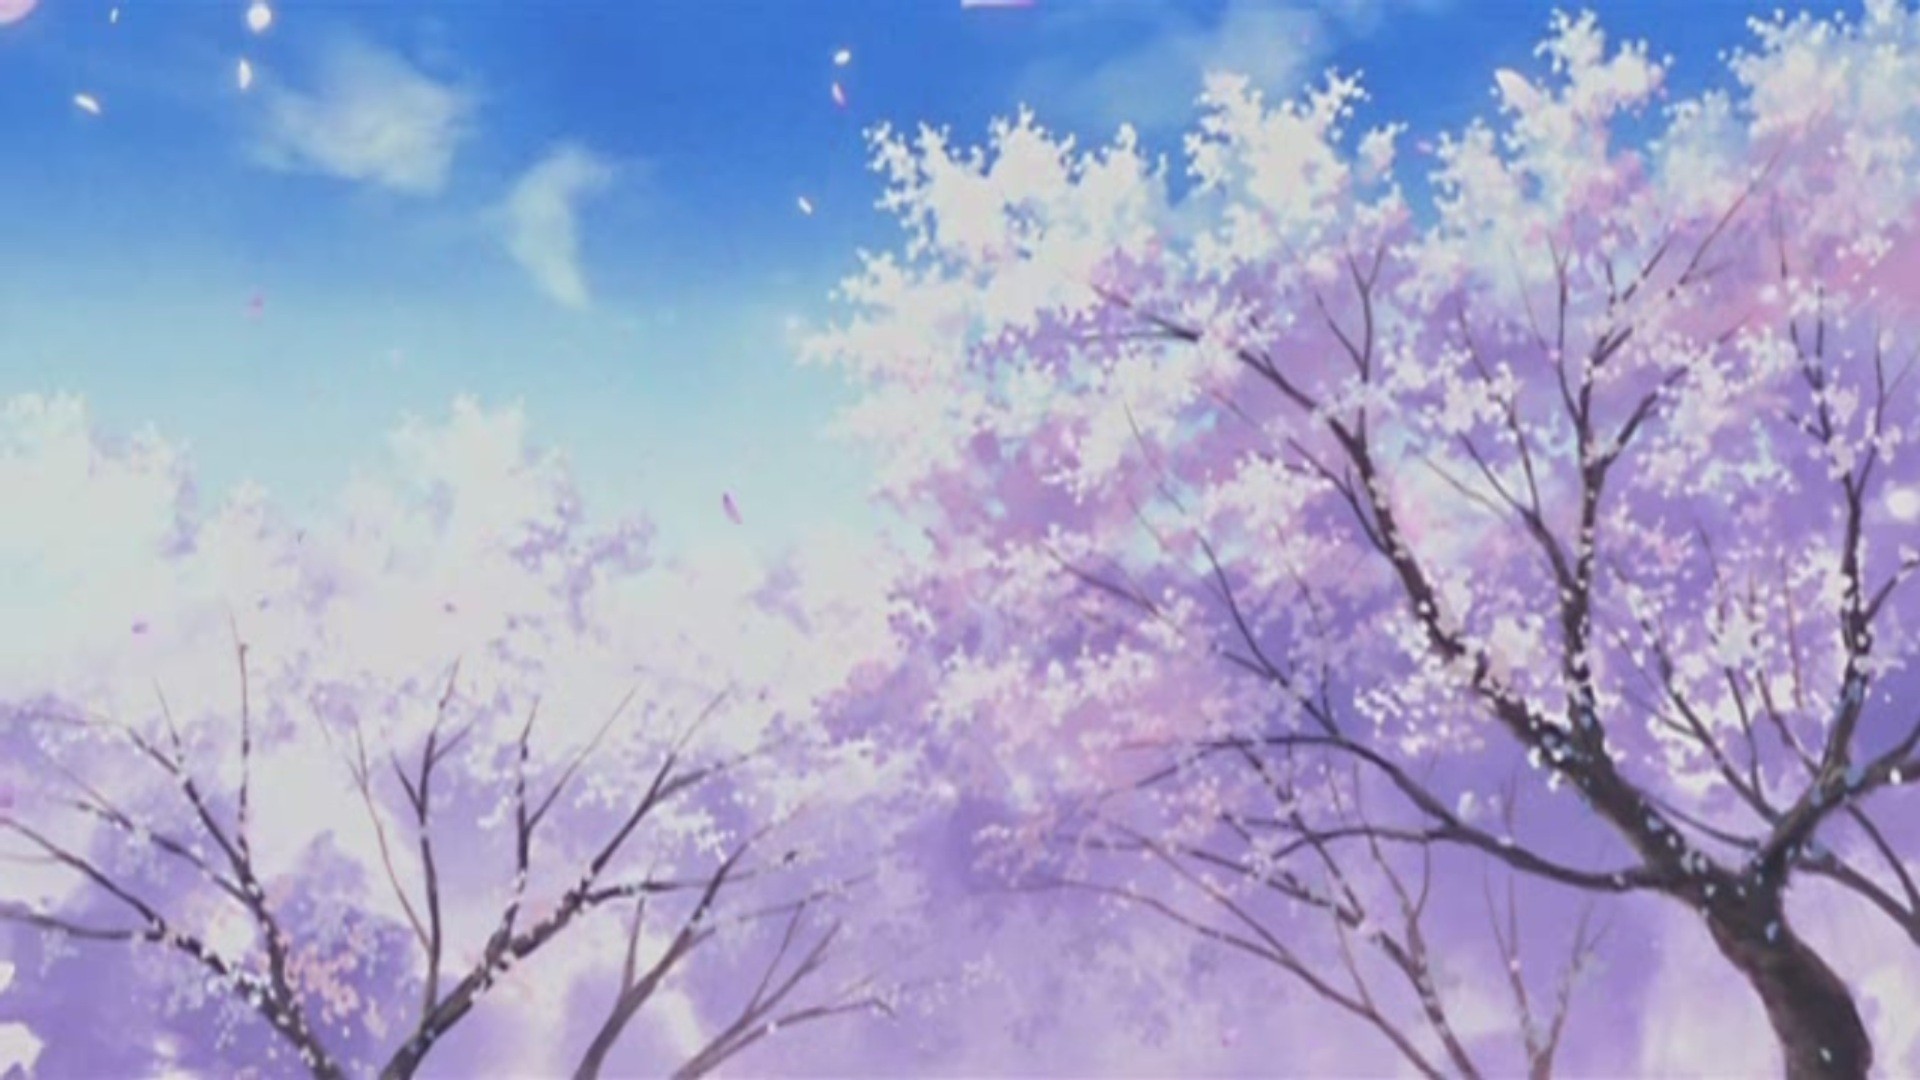 Dark Anime background Scenery ·① Download free stunning wallpapers for